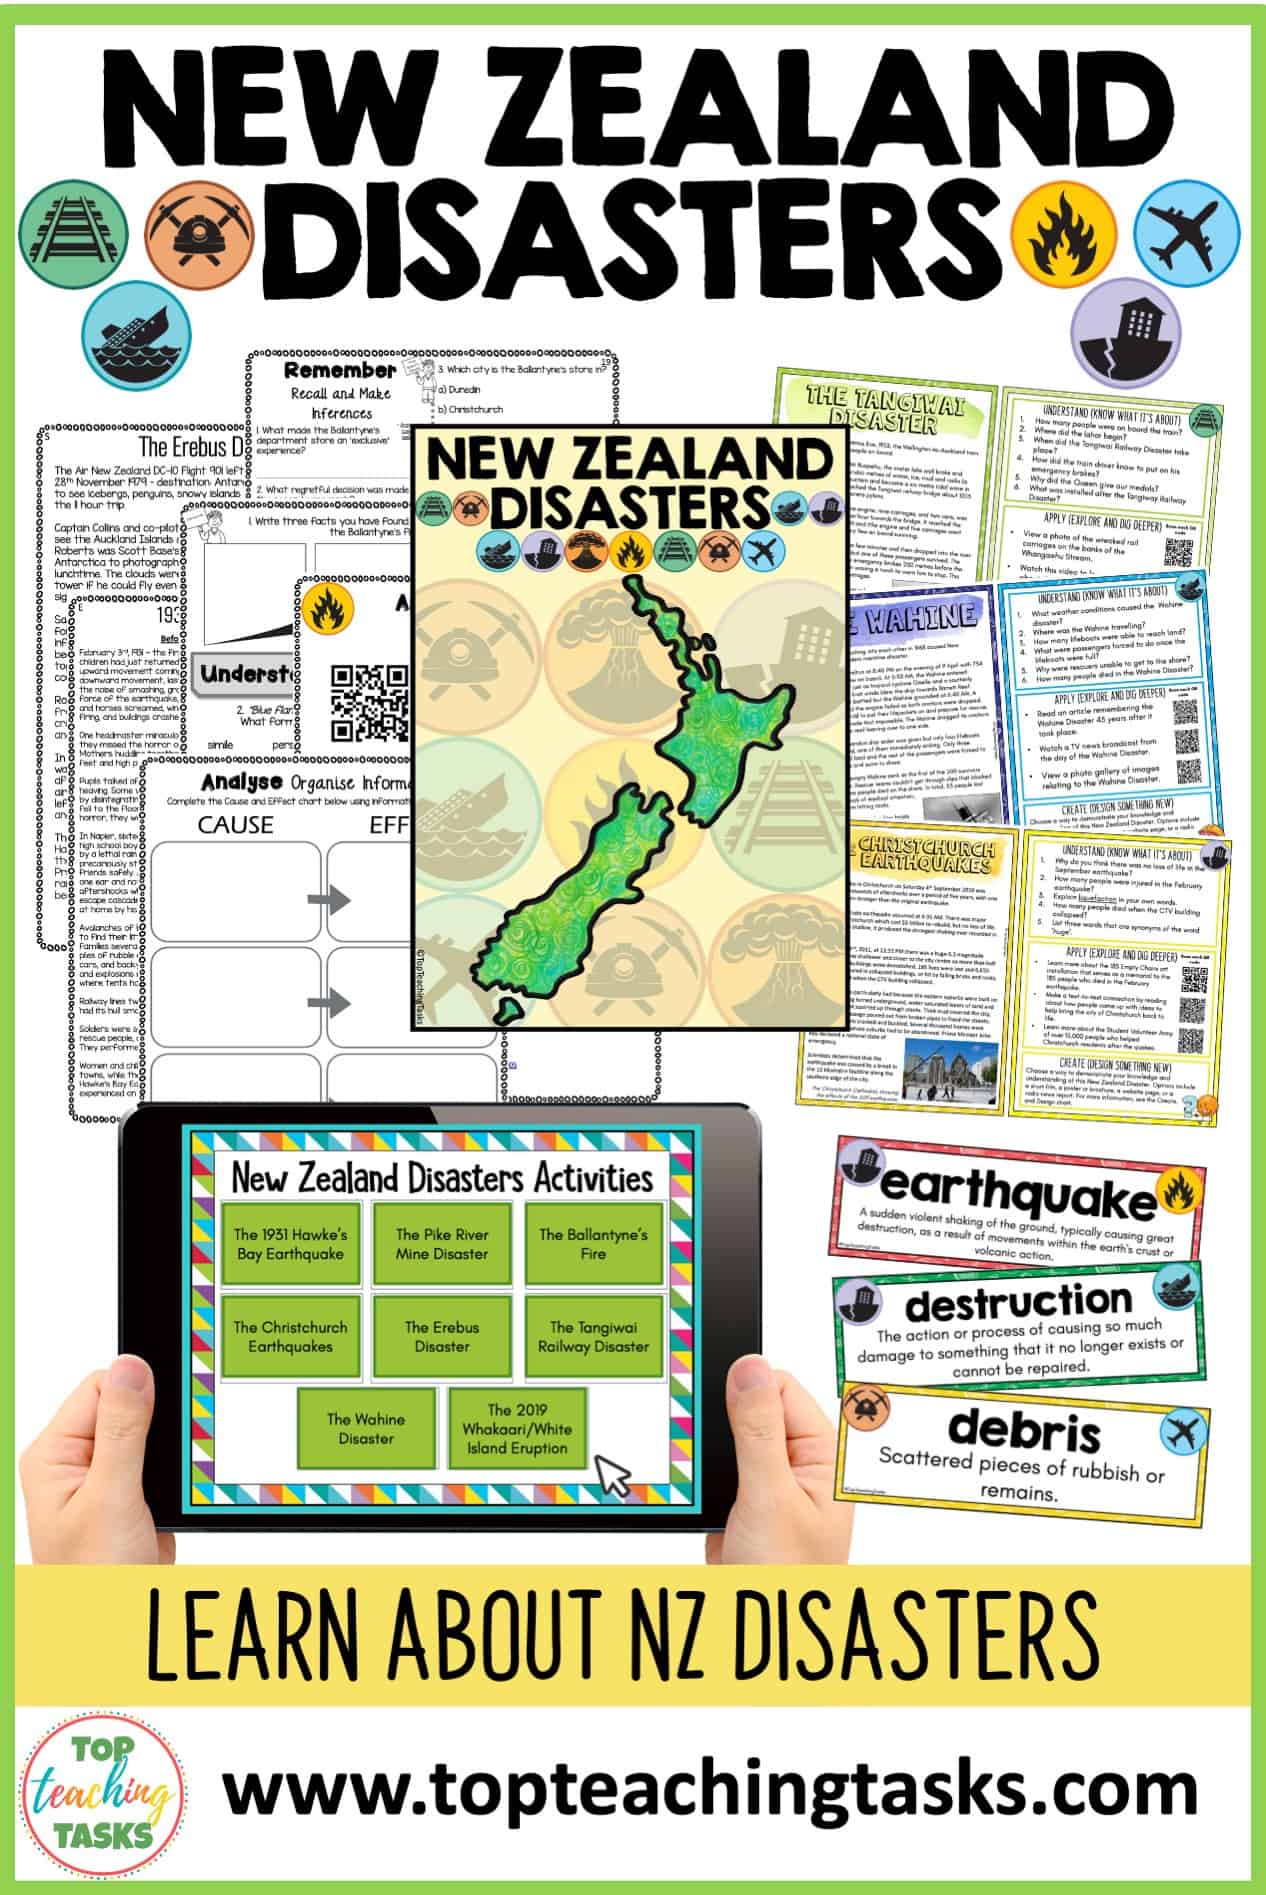 New Zealand Disasters. Explore some of the most devastating disasters in New Zealand's history. In this New Zealand Disasters Unit, students will learn about eight historic and recent disasters and their effect upon Aotearoa. Through a range of activity options, students will extend their knowledge of these events, apply this knowledge by exploring digital links, and put their own design skills to the test with creative challenges. 